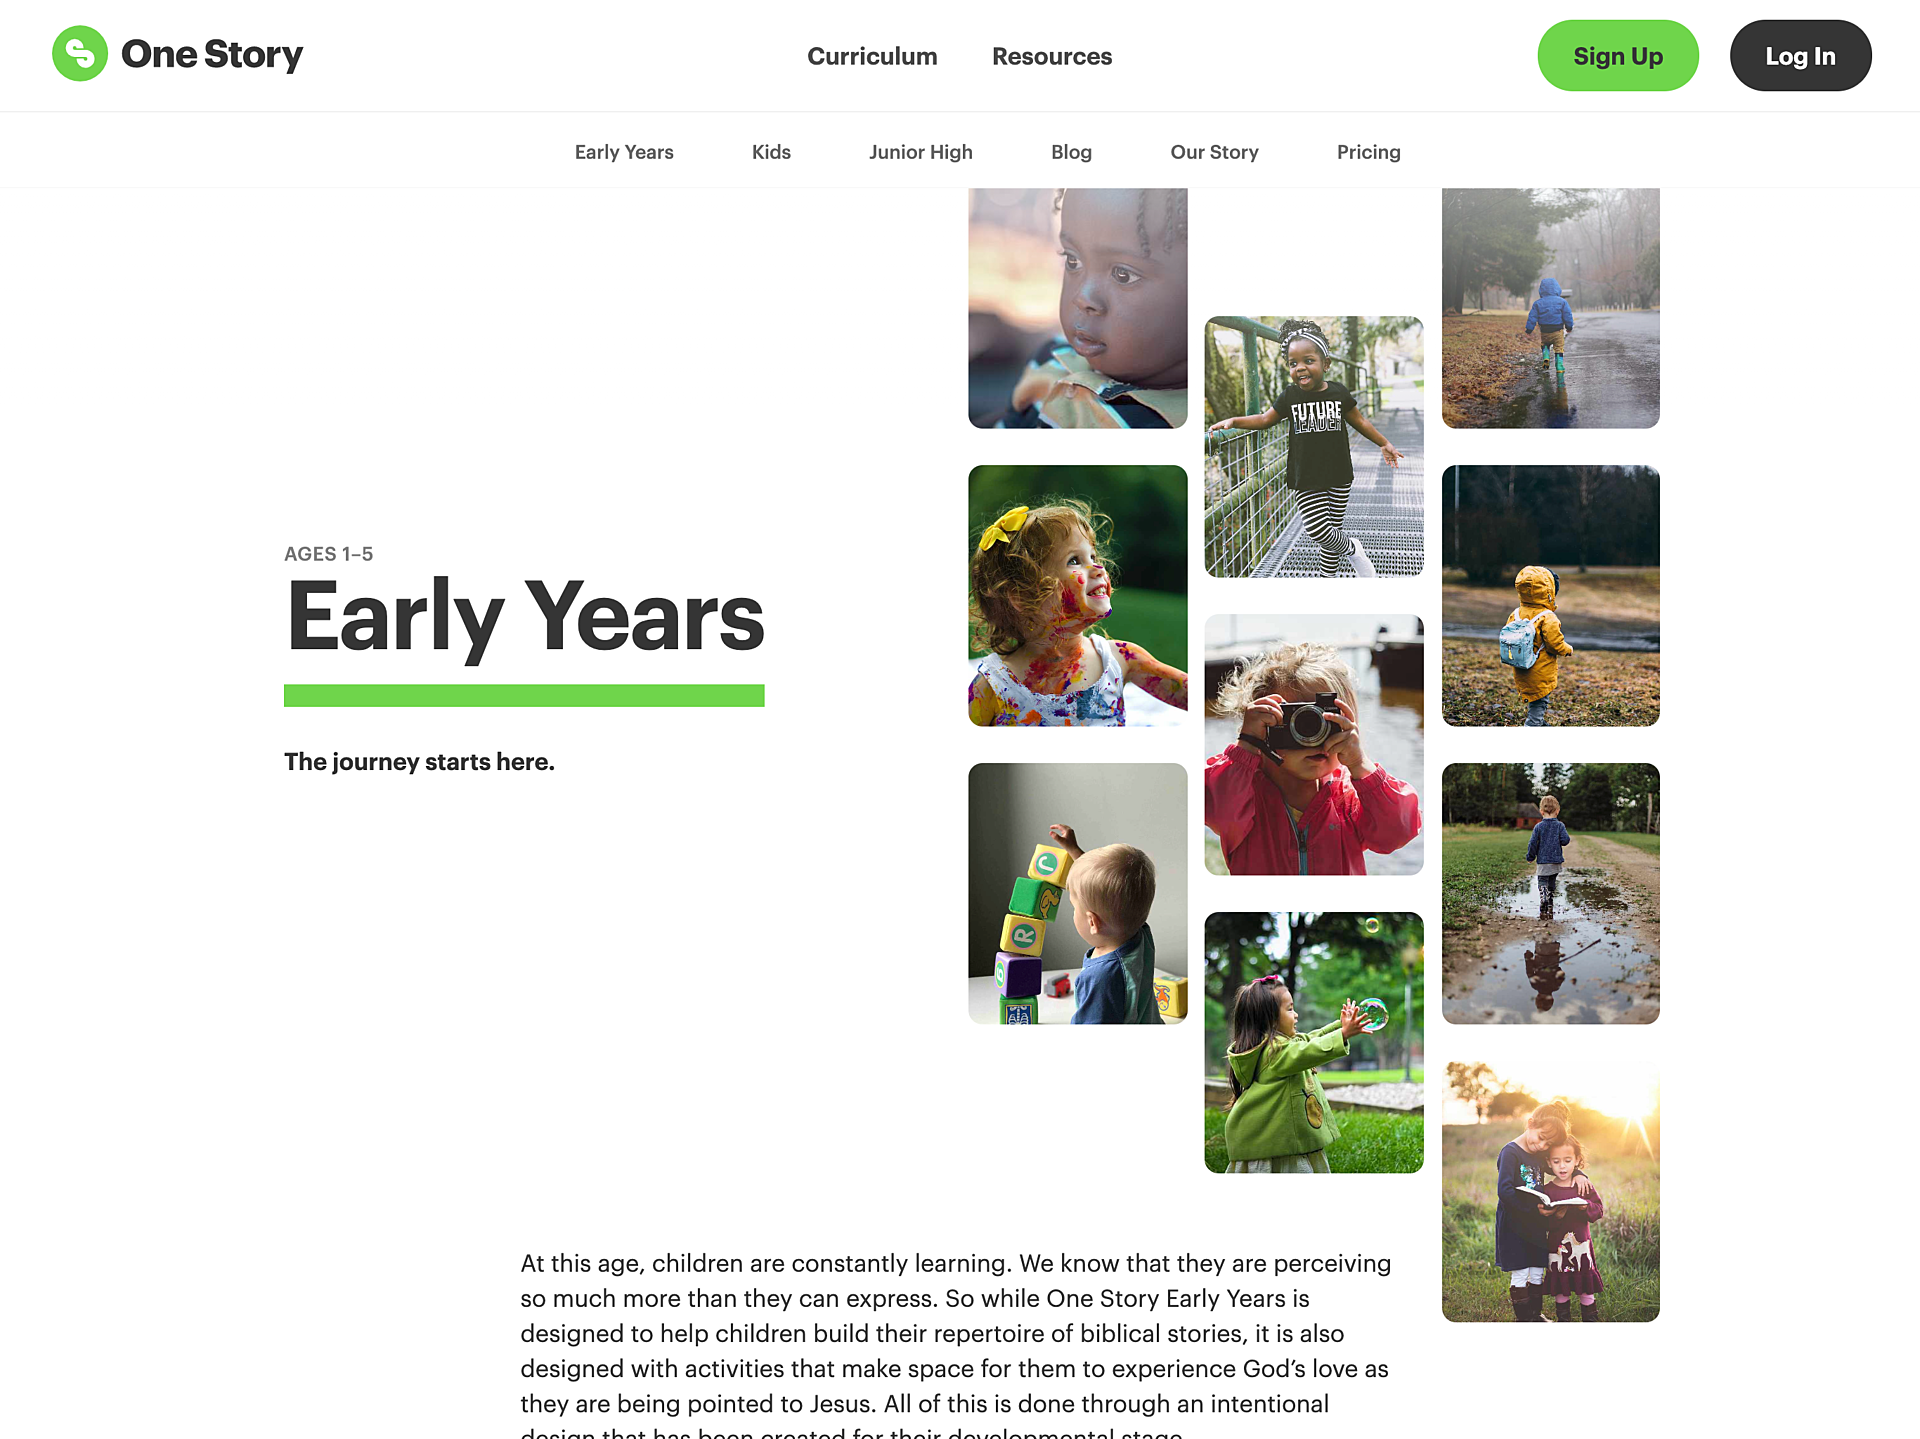 The page header of the Early Years curriculum page on the One Story website